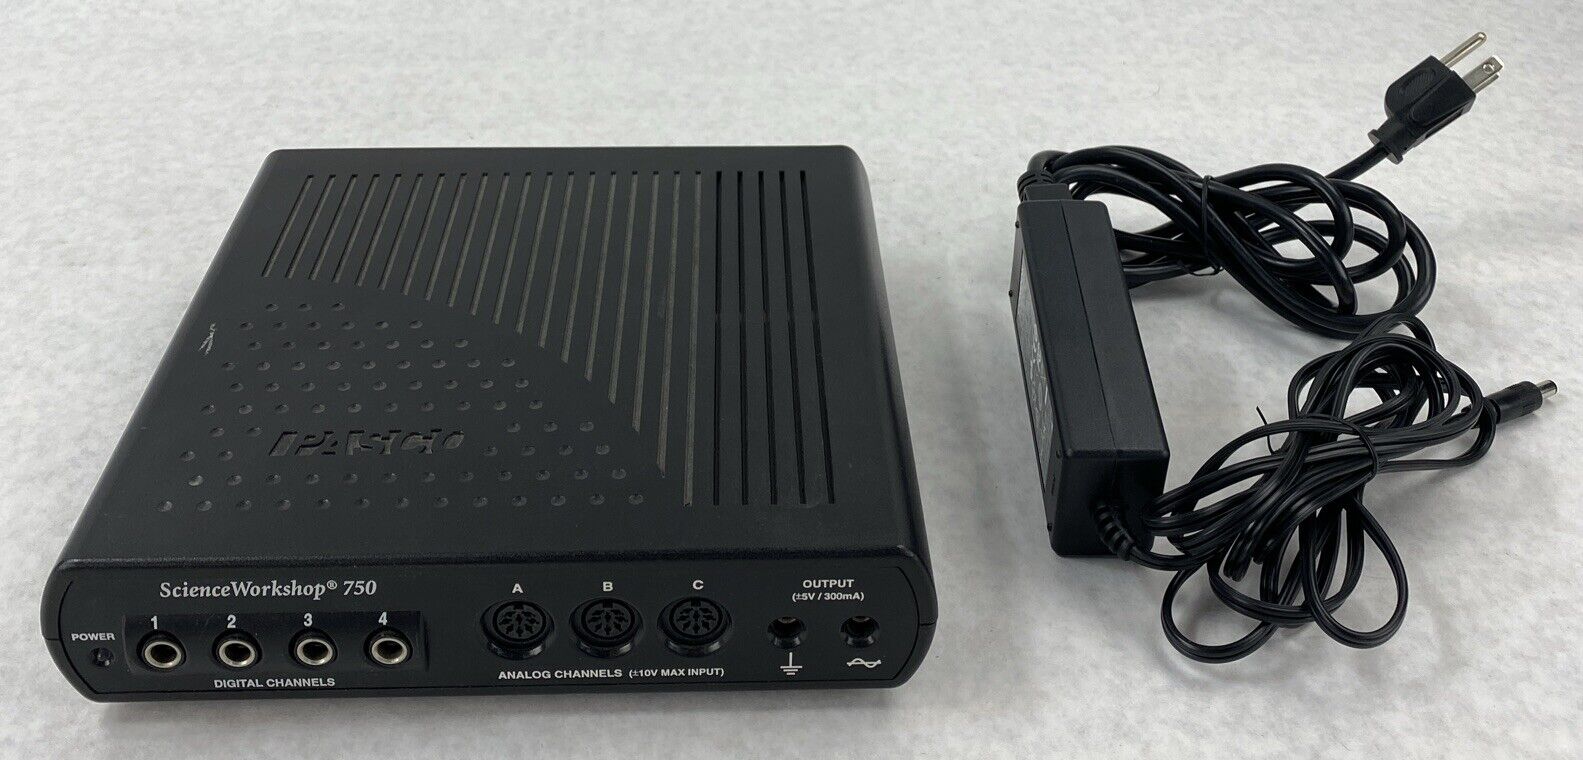 Pasco CI-7500 Scientific Workshop 750 Interface USB-B with Power Adapter